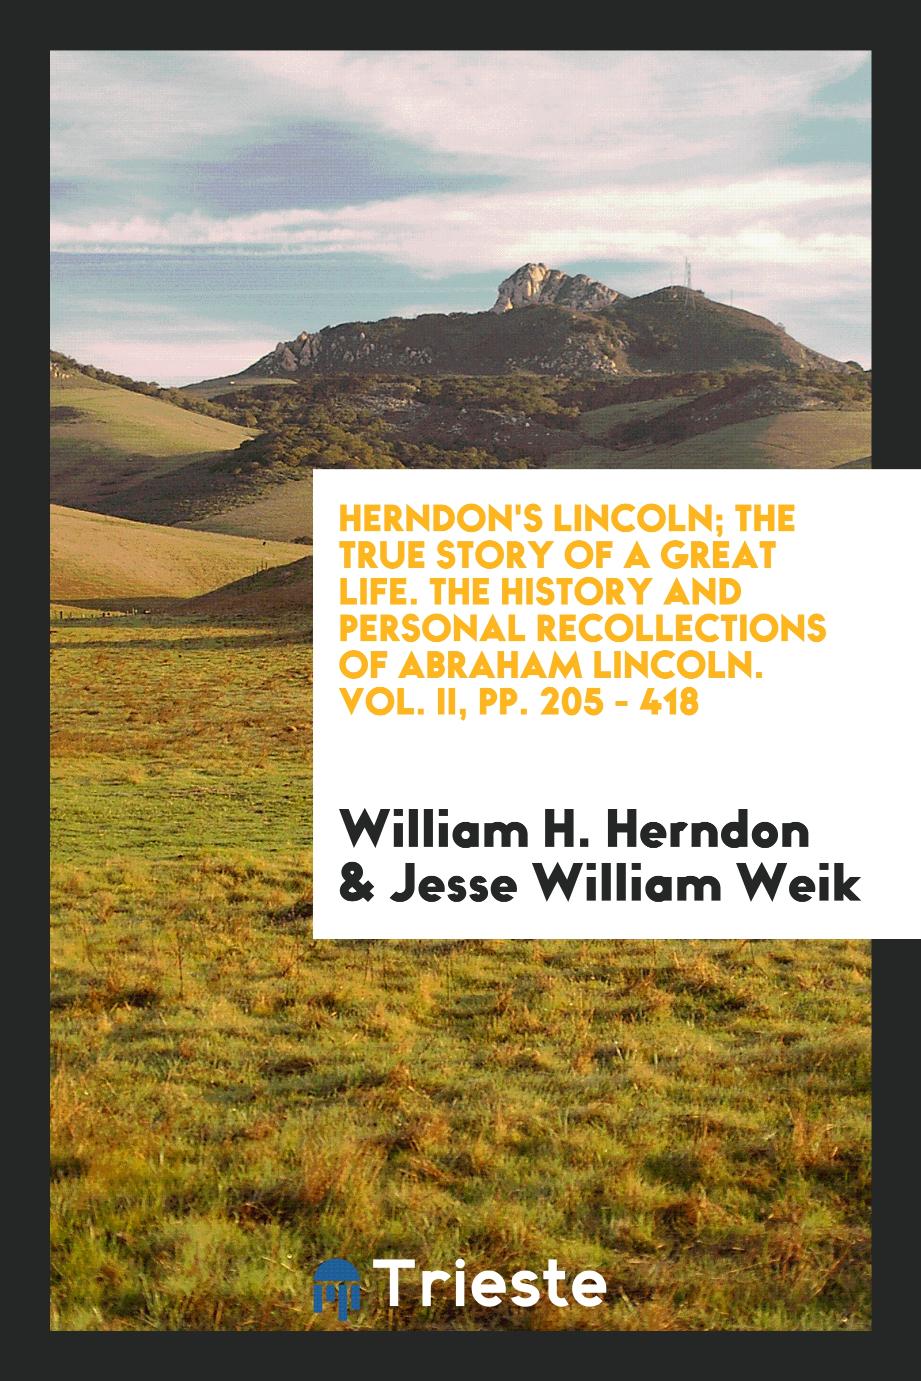 Herndon's Lincoln; the true story of a great life. The history and personal recollections of Abraham Lincoln. Vol. II, pp. 205 - 418